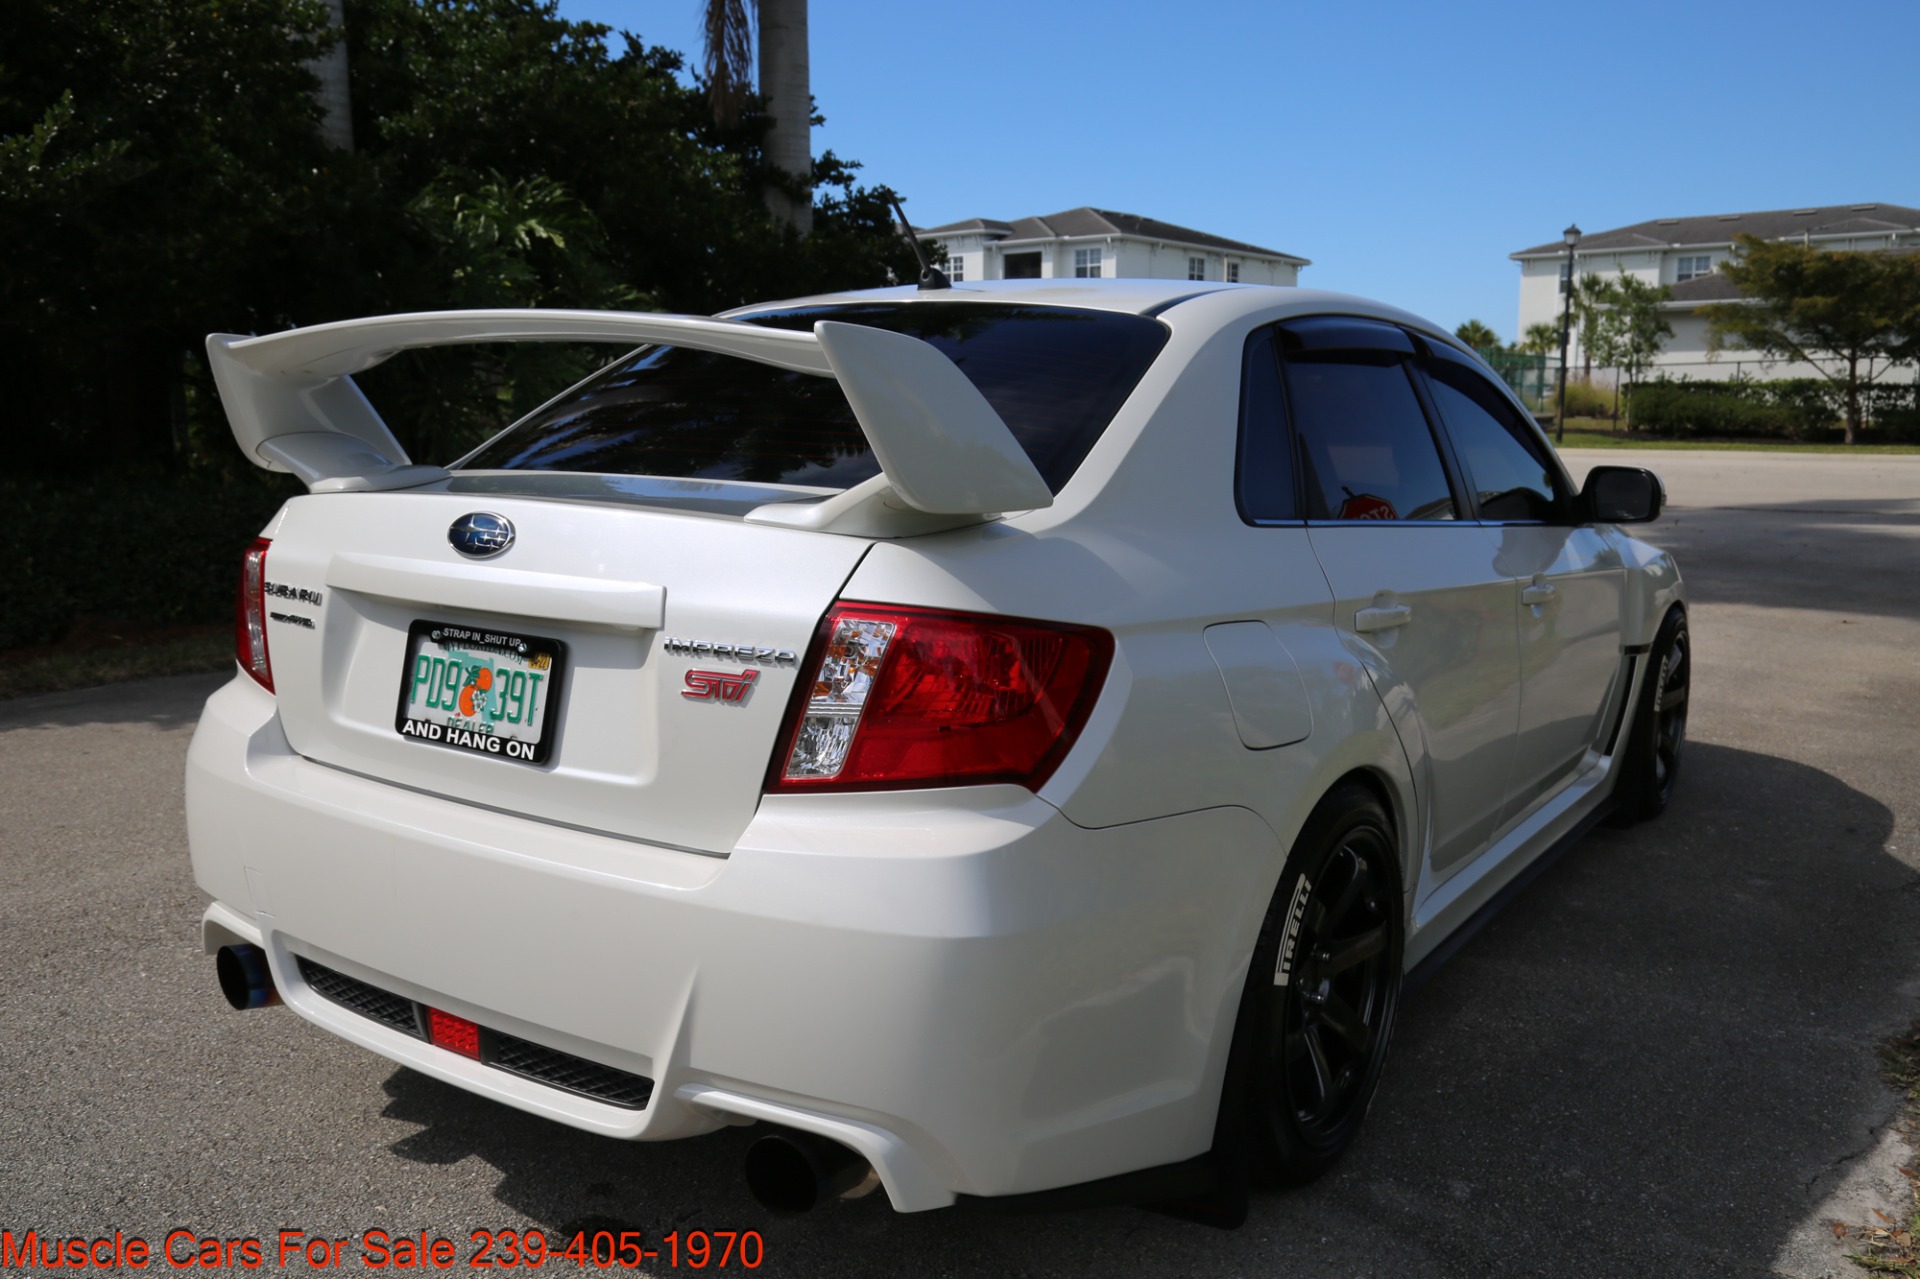 Used 2014 Subaru Impreza WRX STl Limited for sale $26,000 at Muscle Cars for Sale Inc. in Fort Myers FL 33912 3